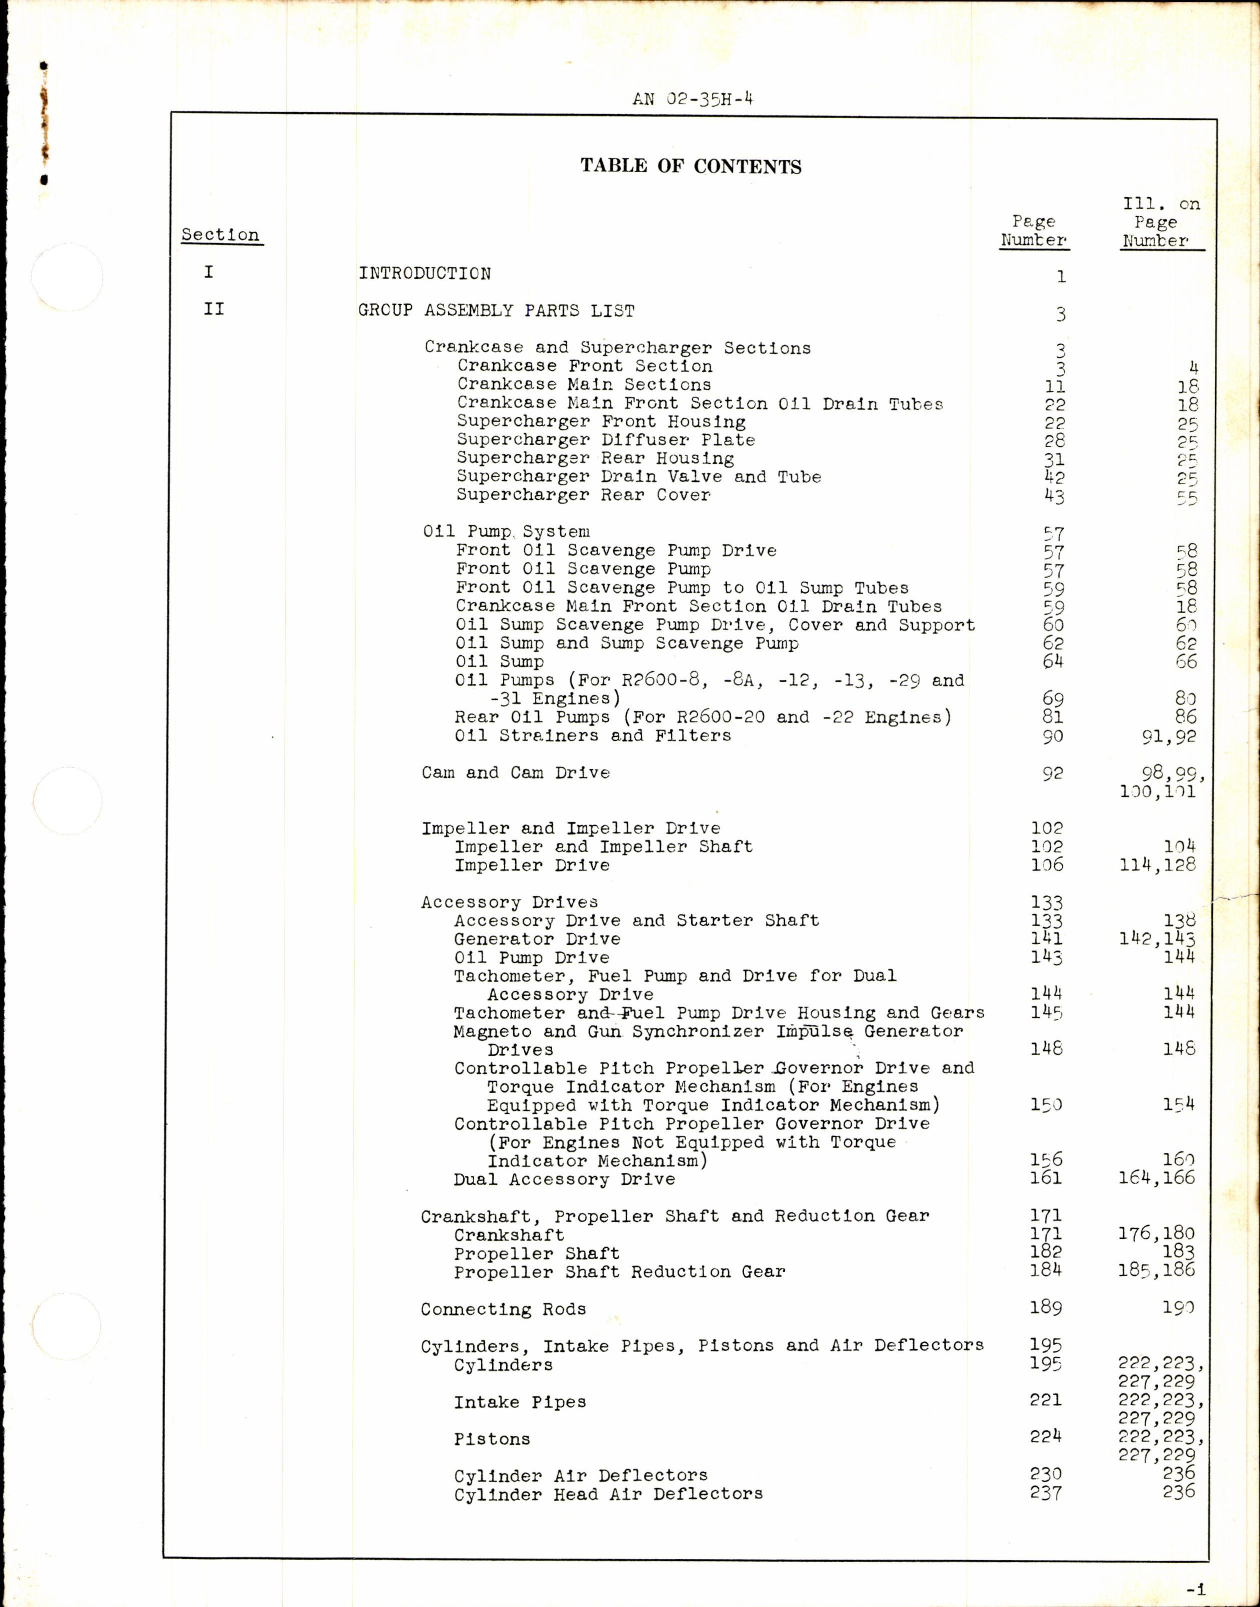 Sample page 3 from AirCorps Library document: Parts Catalog for Models R-2600-8